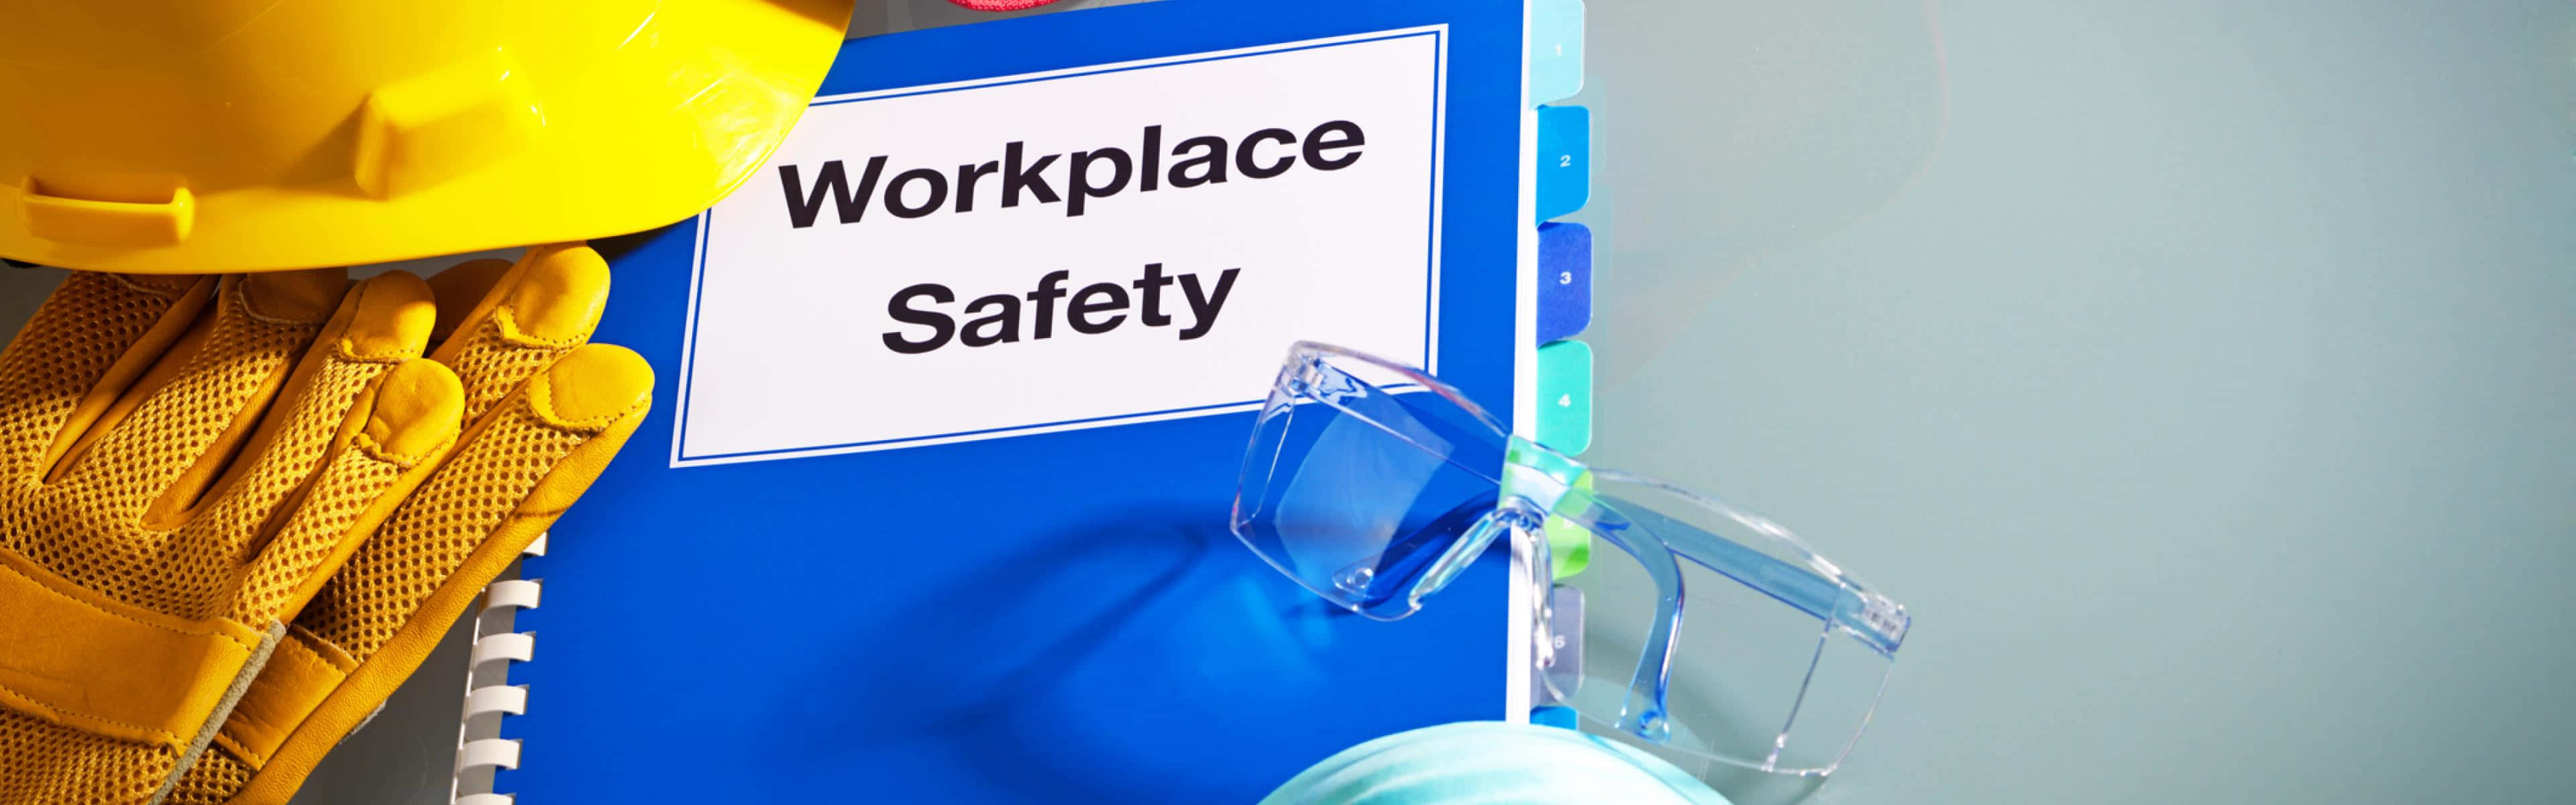 Workplace Safety Logbook Picture